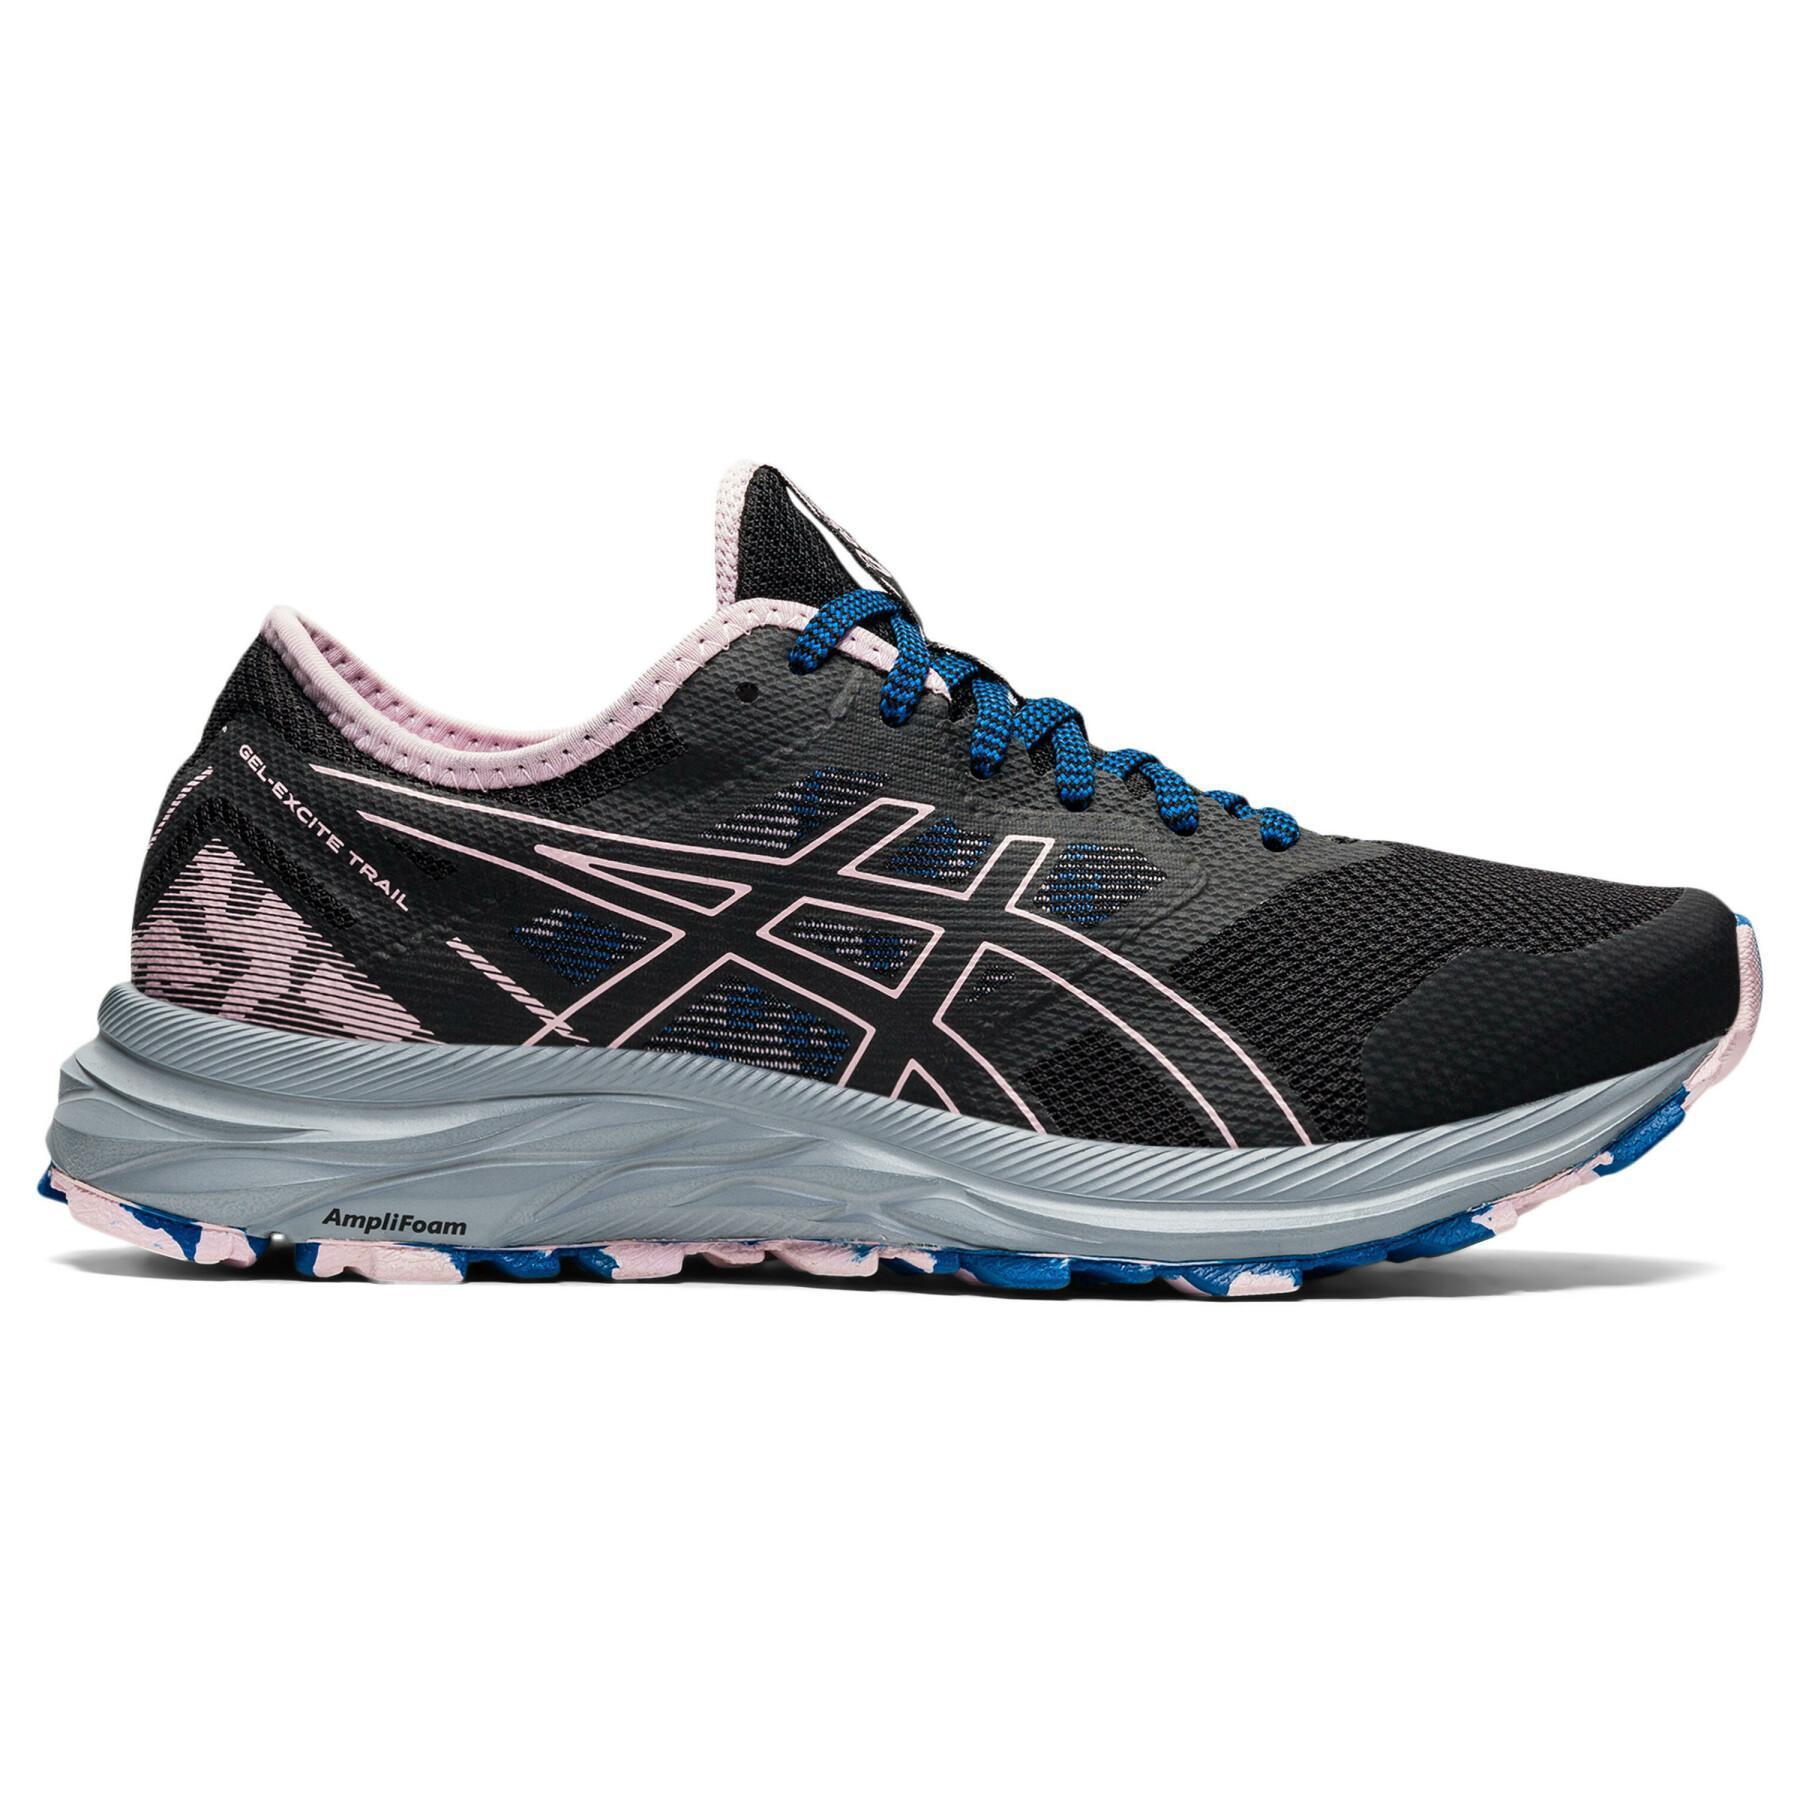 Chaussures femme Asics Gel-Excite Trail